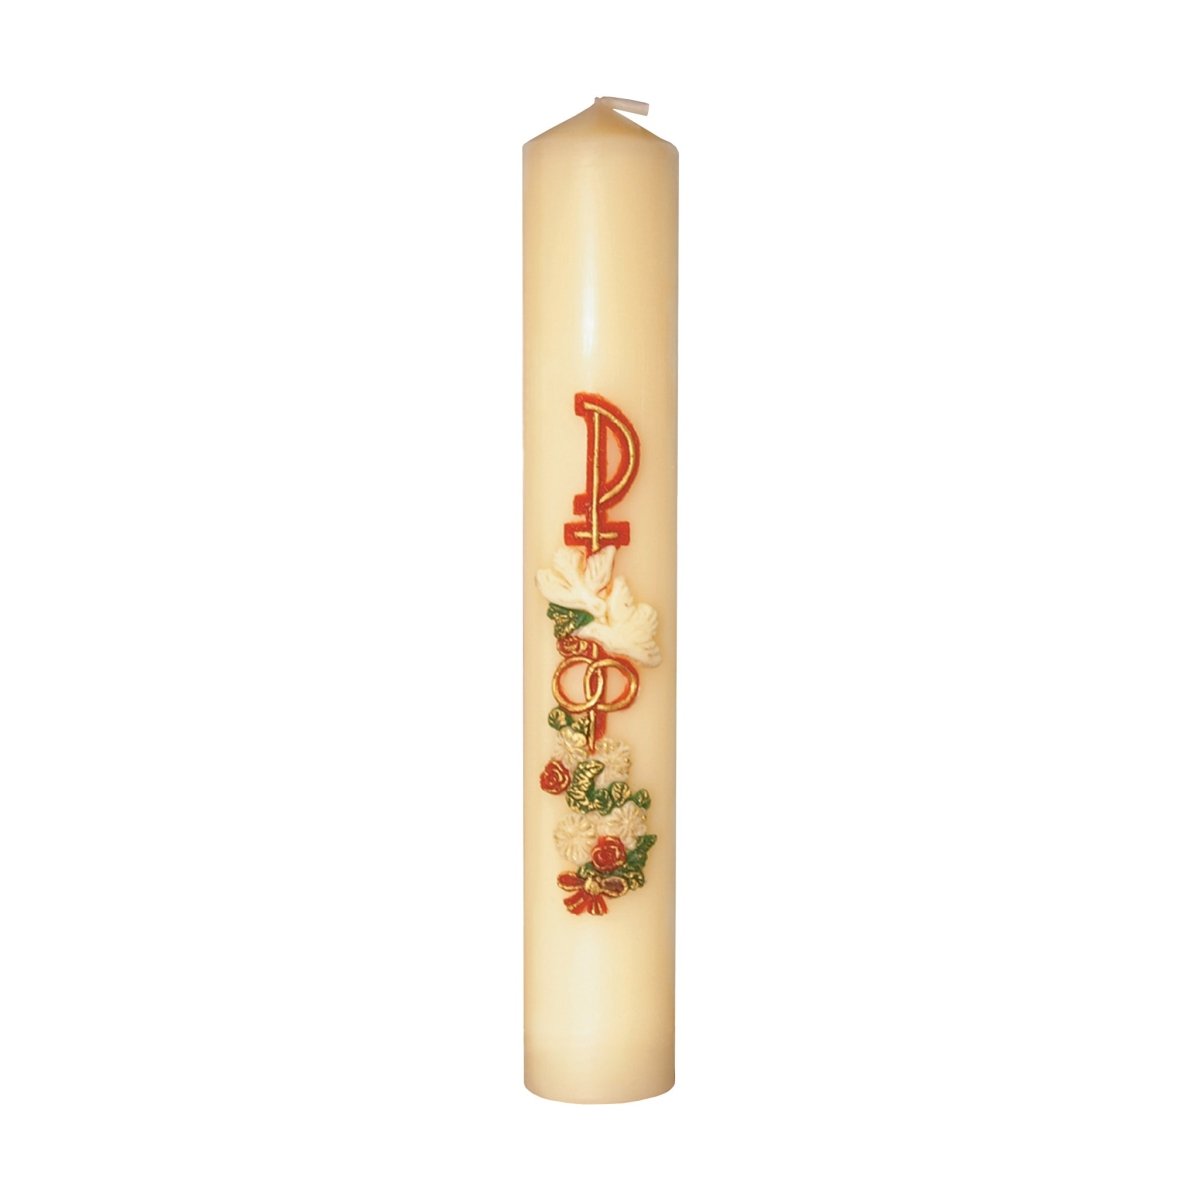 12" x 2" Sacramental Marriage Candle - Hayes & Finch